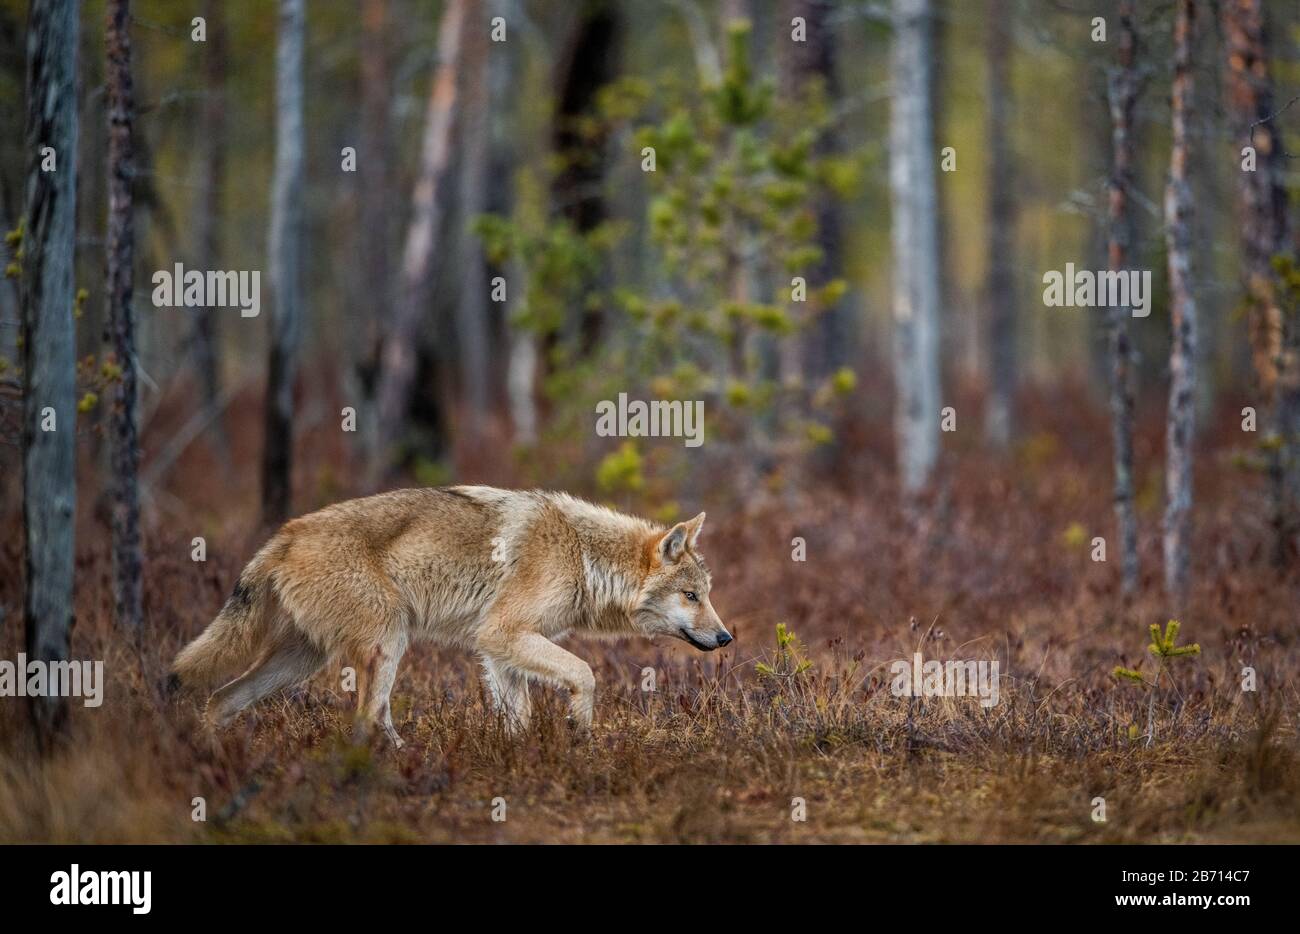 A wolf sneaks through the autumn forest. Eurasian wolf, also known as the gray or grey wolf also known as Timber wolf.  Scientific name: Canis lupus l Stock Photo